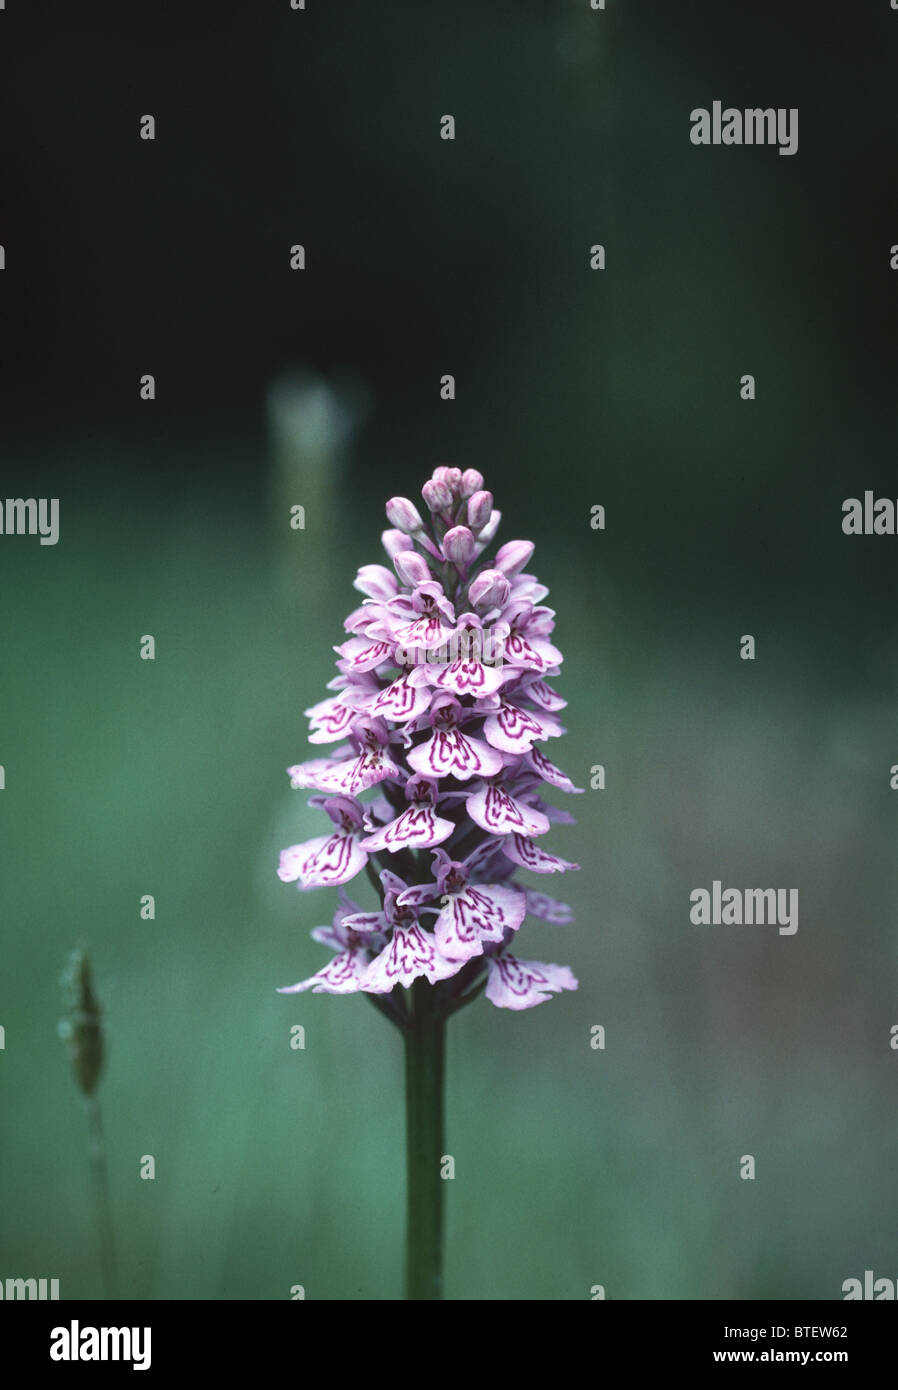 Common spotted orchid Foto Stock